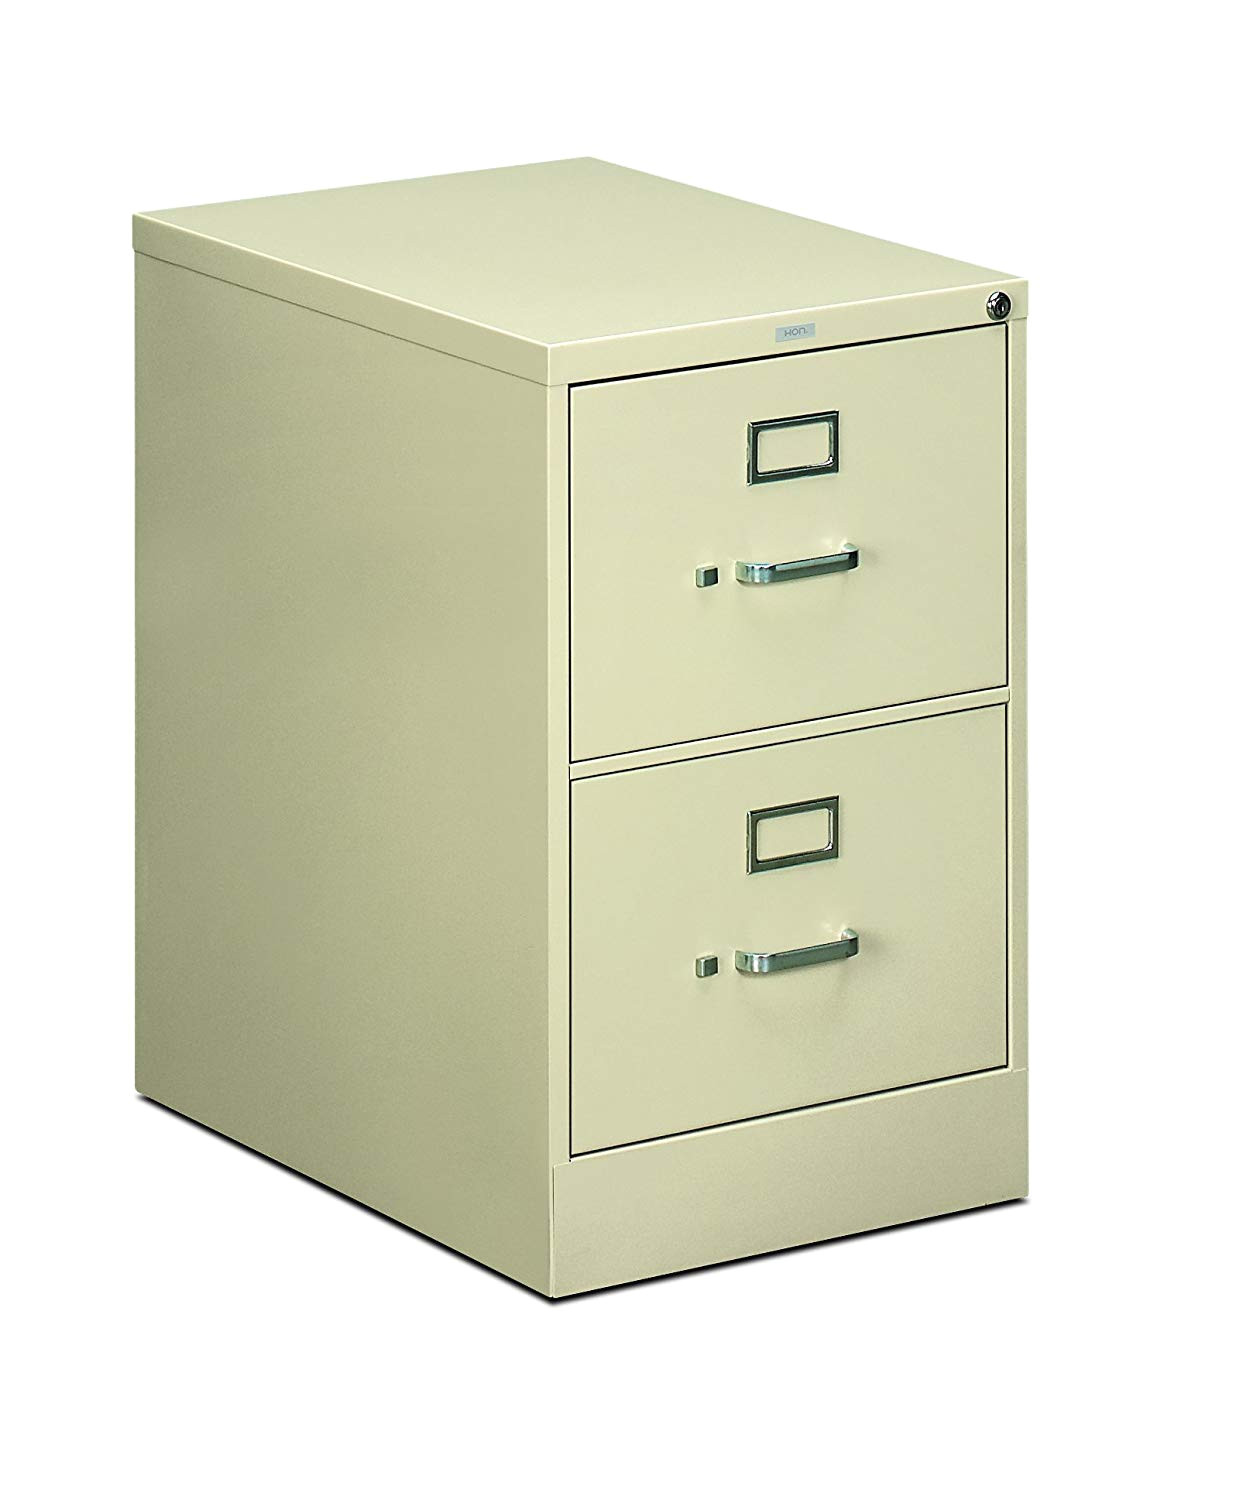 amazon com hon 4 drawer letter file full suspension filing cabinet with lock 52 by 25 inch light gray h514 kitchen dining